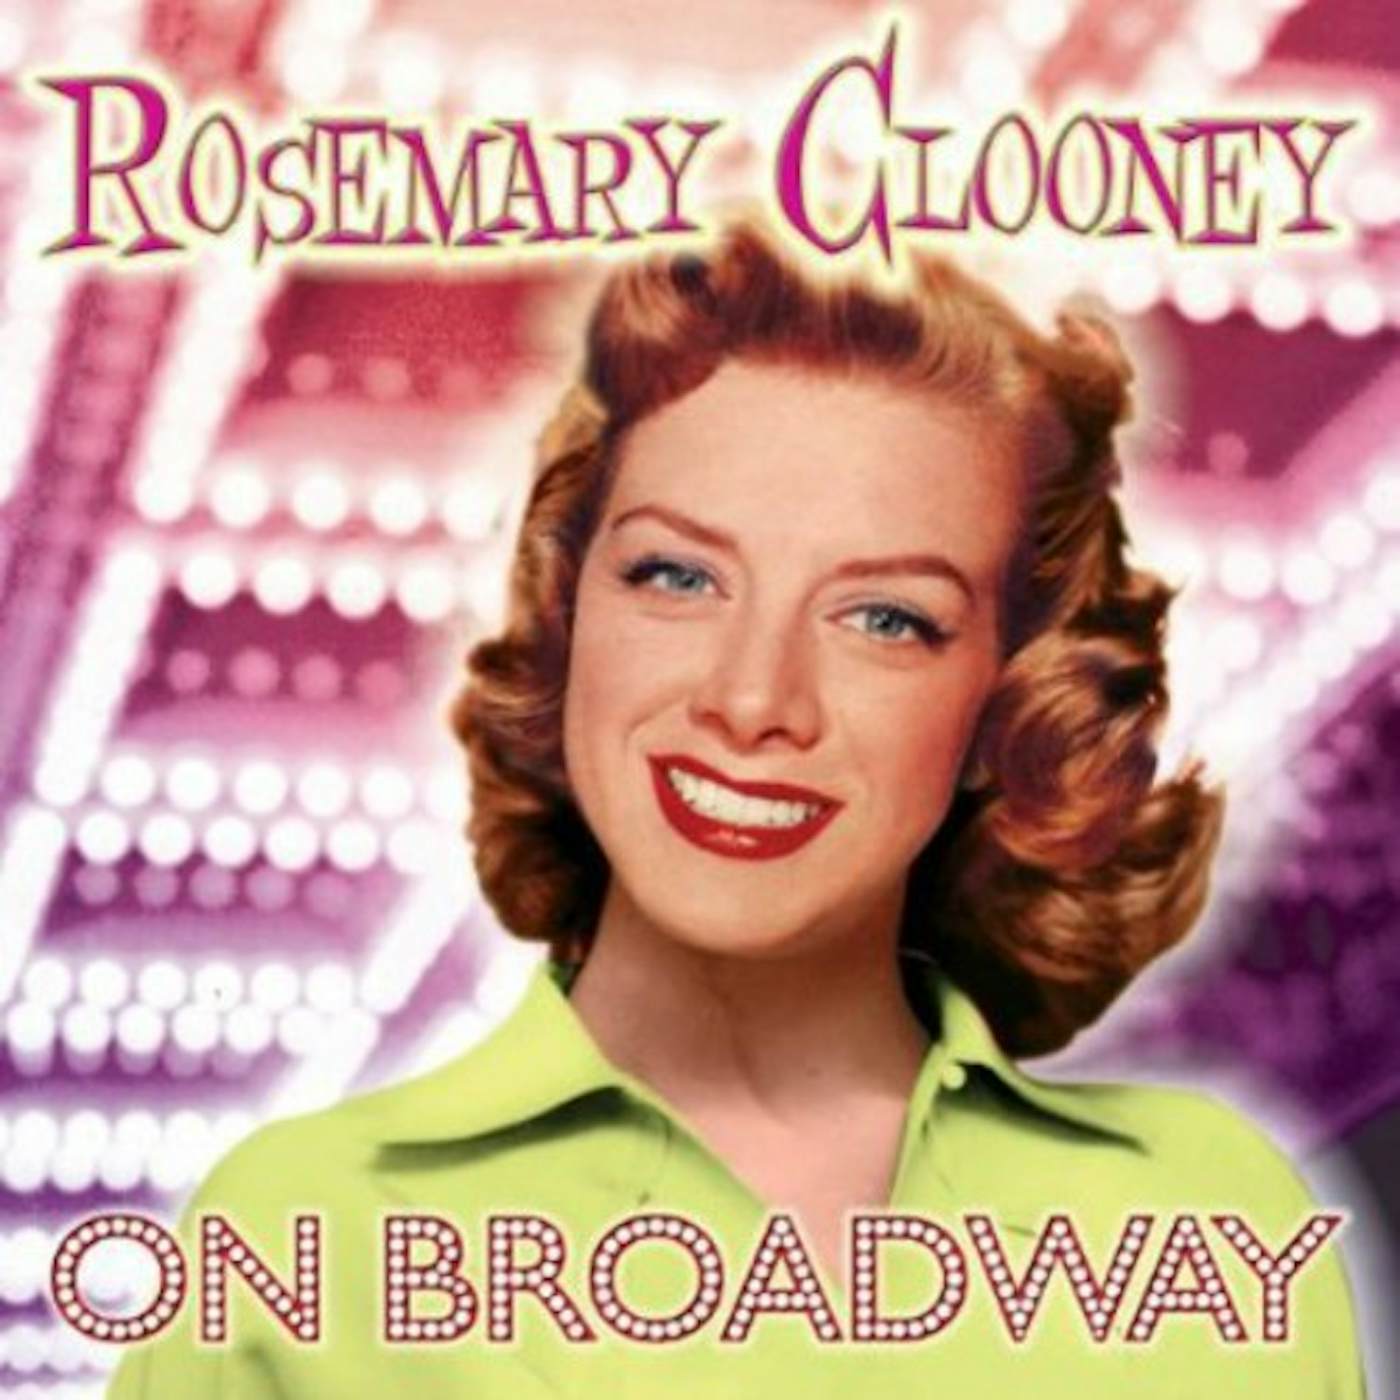 Rosemary Clooney ON BROADWAY CD